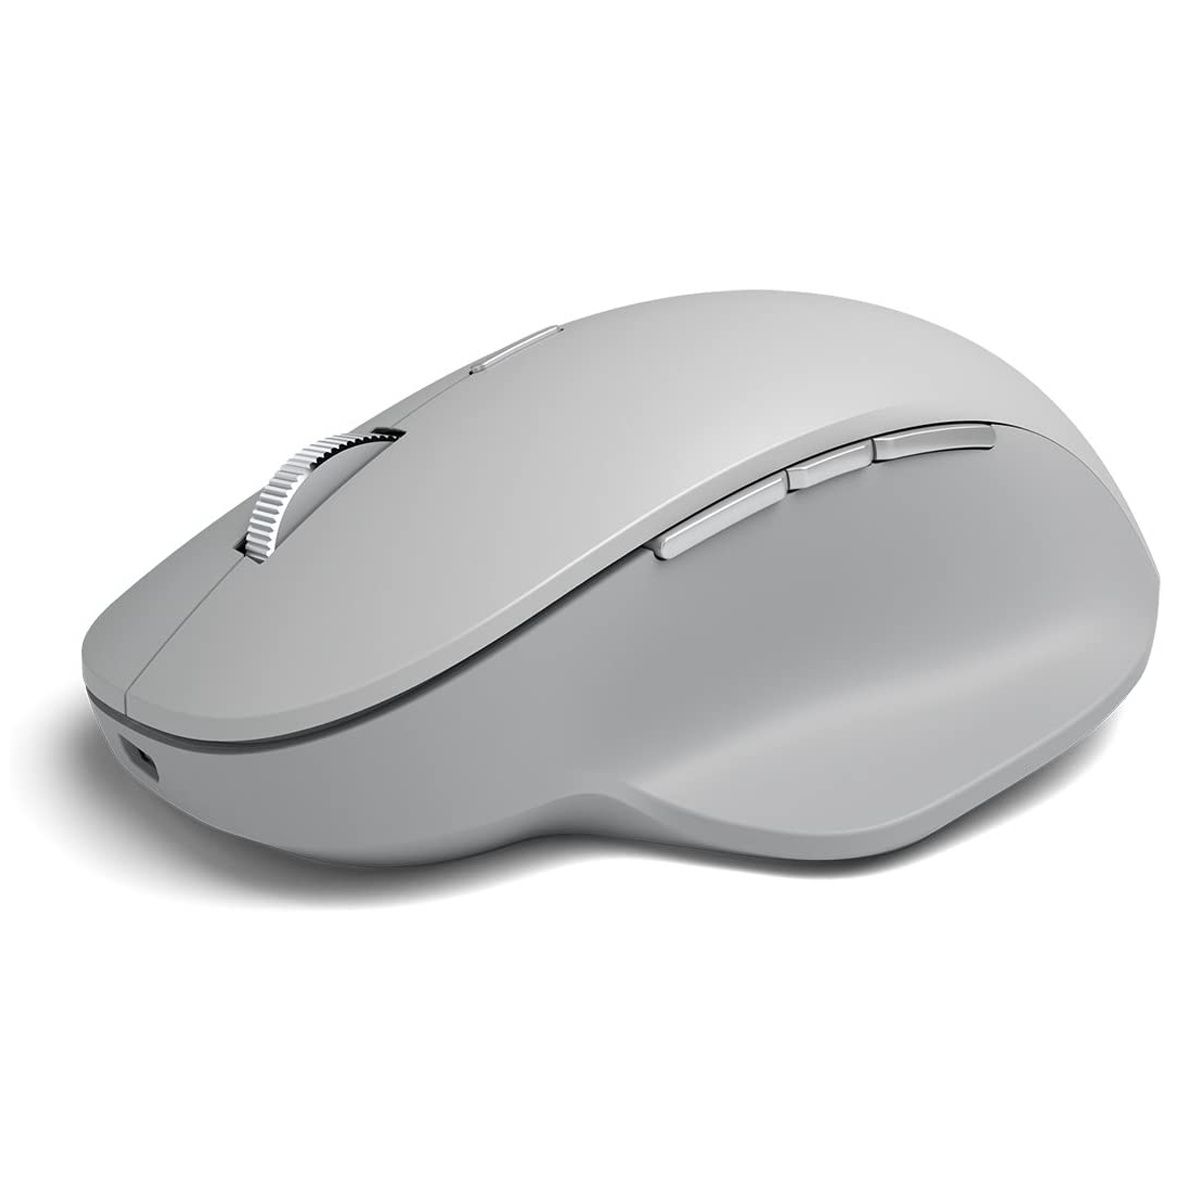 Microsoft's official Surface-branded accessories are usually quite premium and reliable when it comes to design and functionality. The Precision Mouse offers a shape that should suit most users along with programmable buttons, and solid battery life.